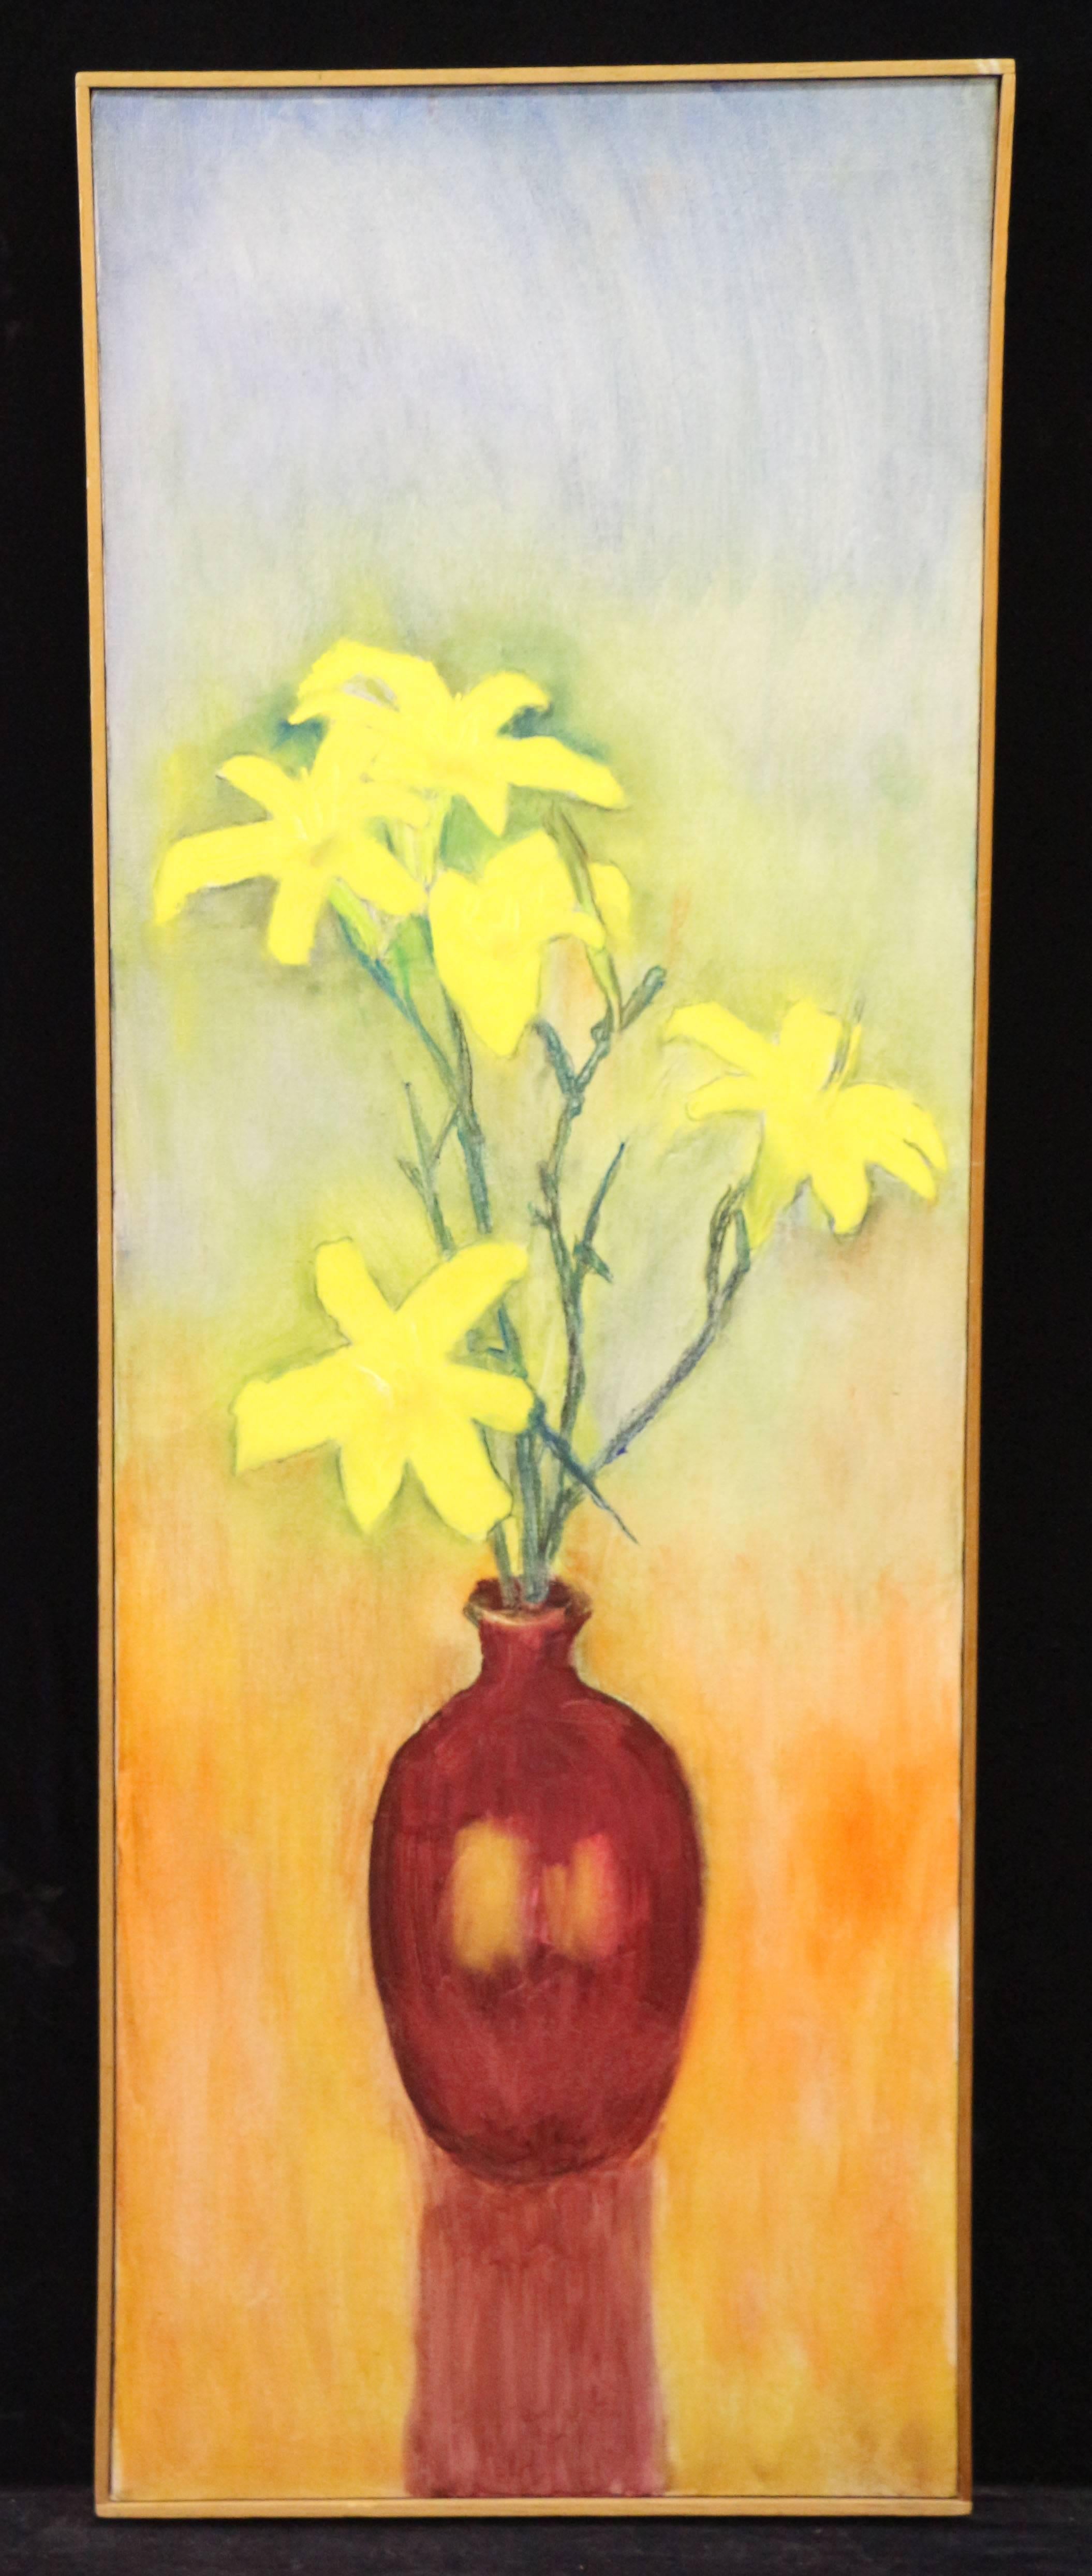 Flower of Light and Life, red flower vase with yellow flowers, rainbow backdrop - Painting by Frederick S. Wight